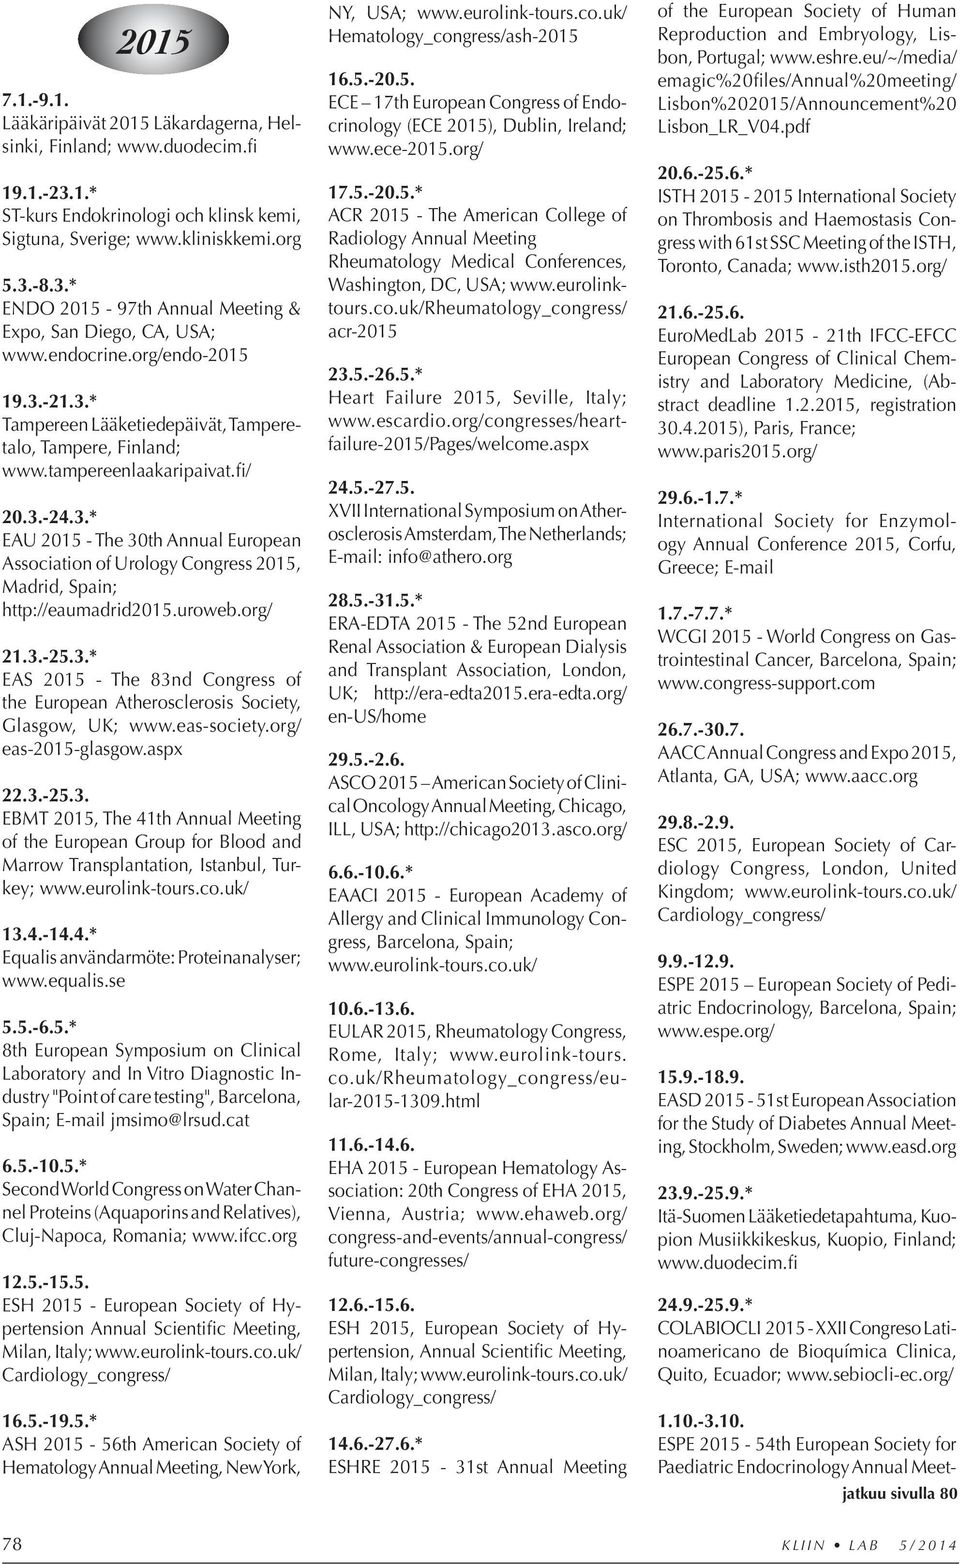 uroweb.org/ 21.3.-25.3.* EAS 2015 - The 83nd Congress of the European Atherosclerosis Society, Glasgow, UK; www.eas-society.org/ eas-2015-glasgow.aspx 22.3.-25.3. EBMT 2015, The 41th Annual Meeting of the European Group for Blood and Marrow Transplantation, Istanbul, Turkey; www.